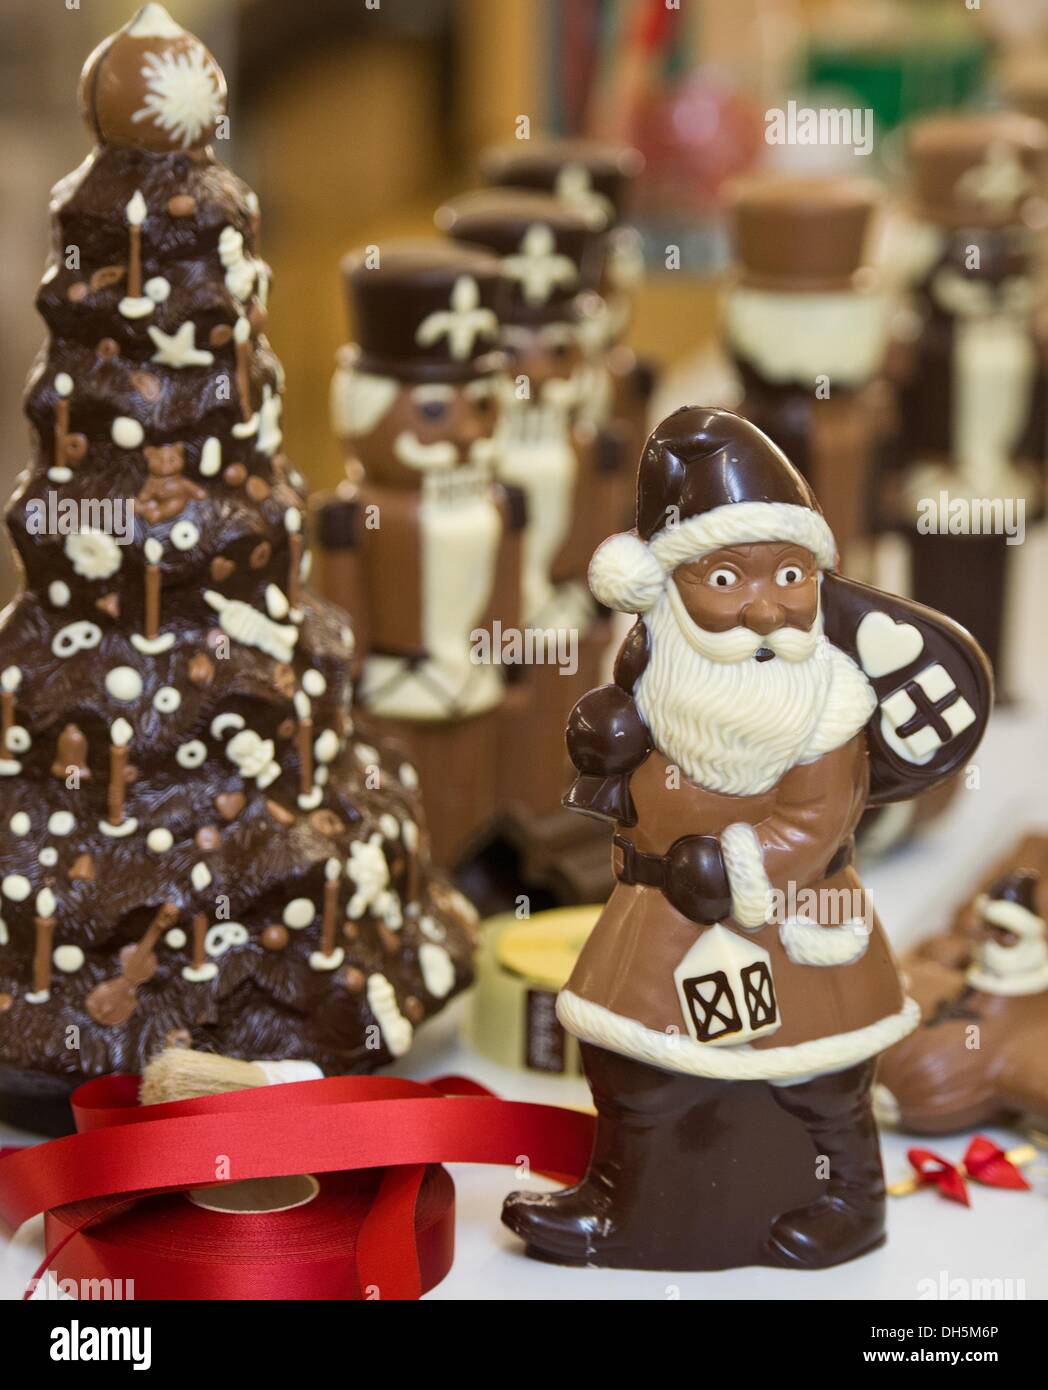 https://c8.alamy.com/comp/DH5M6P/hornow-germany-30th-oct-2013-a-santa-claus-and-other-items-made-of-DH5M6P.jpg